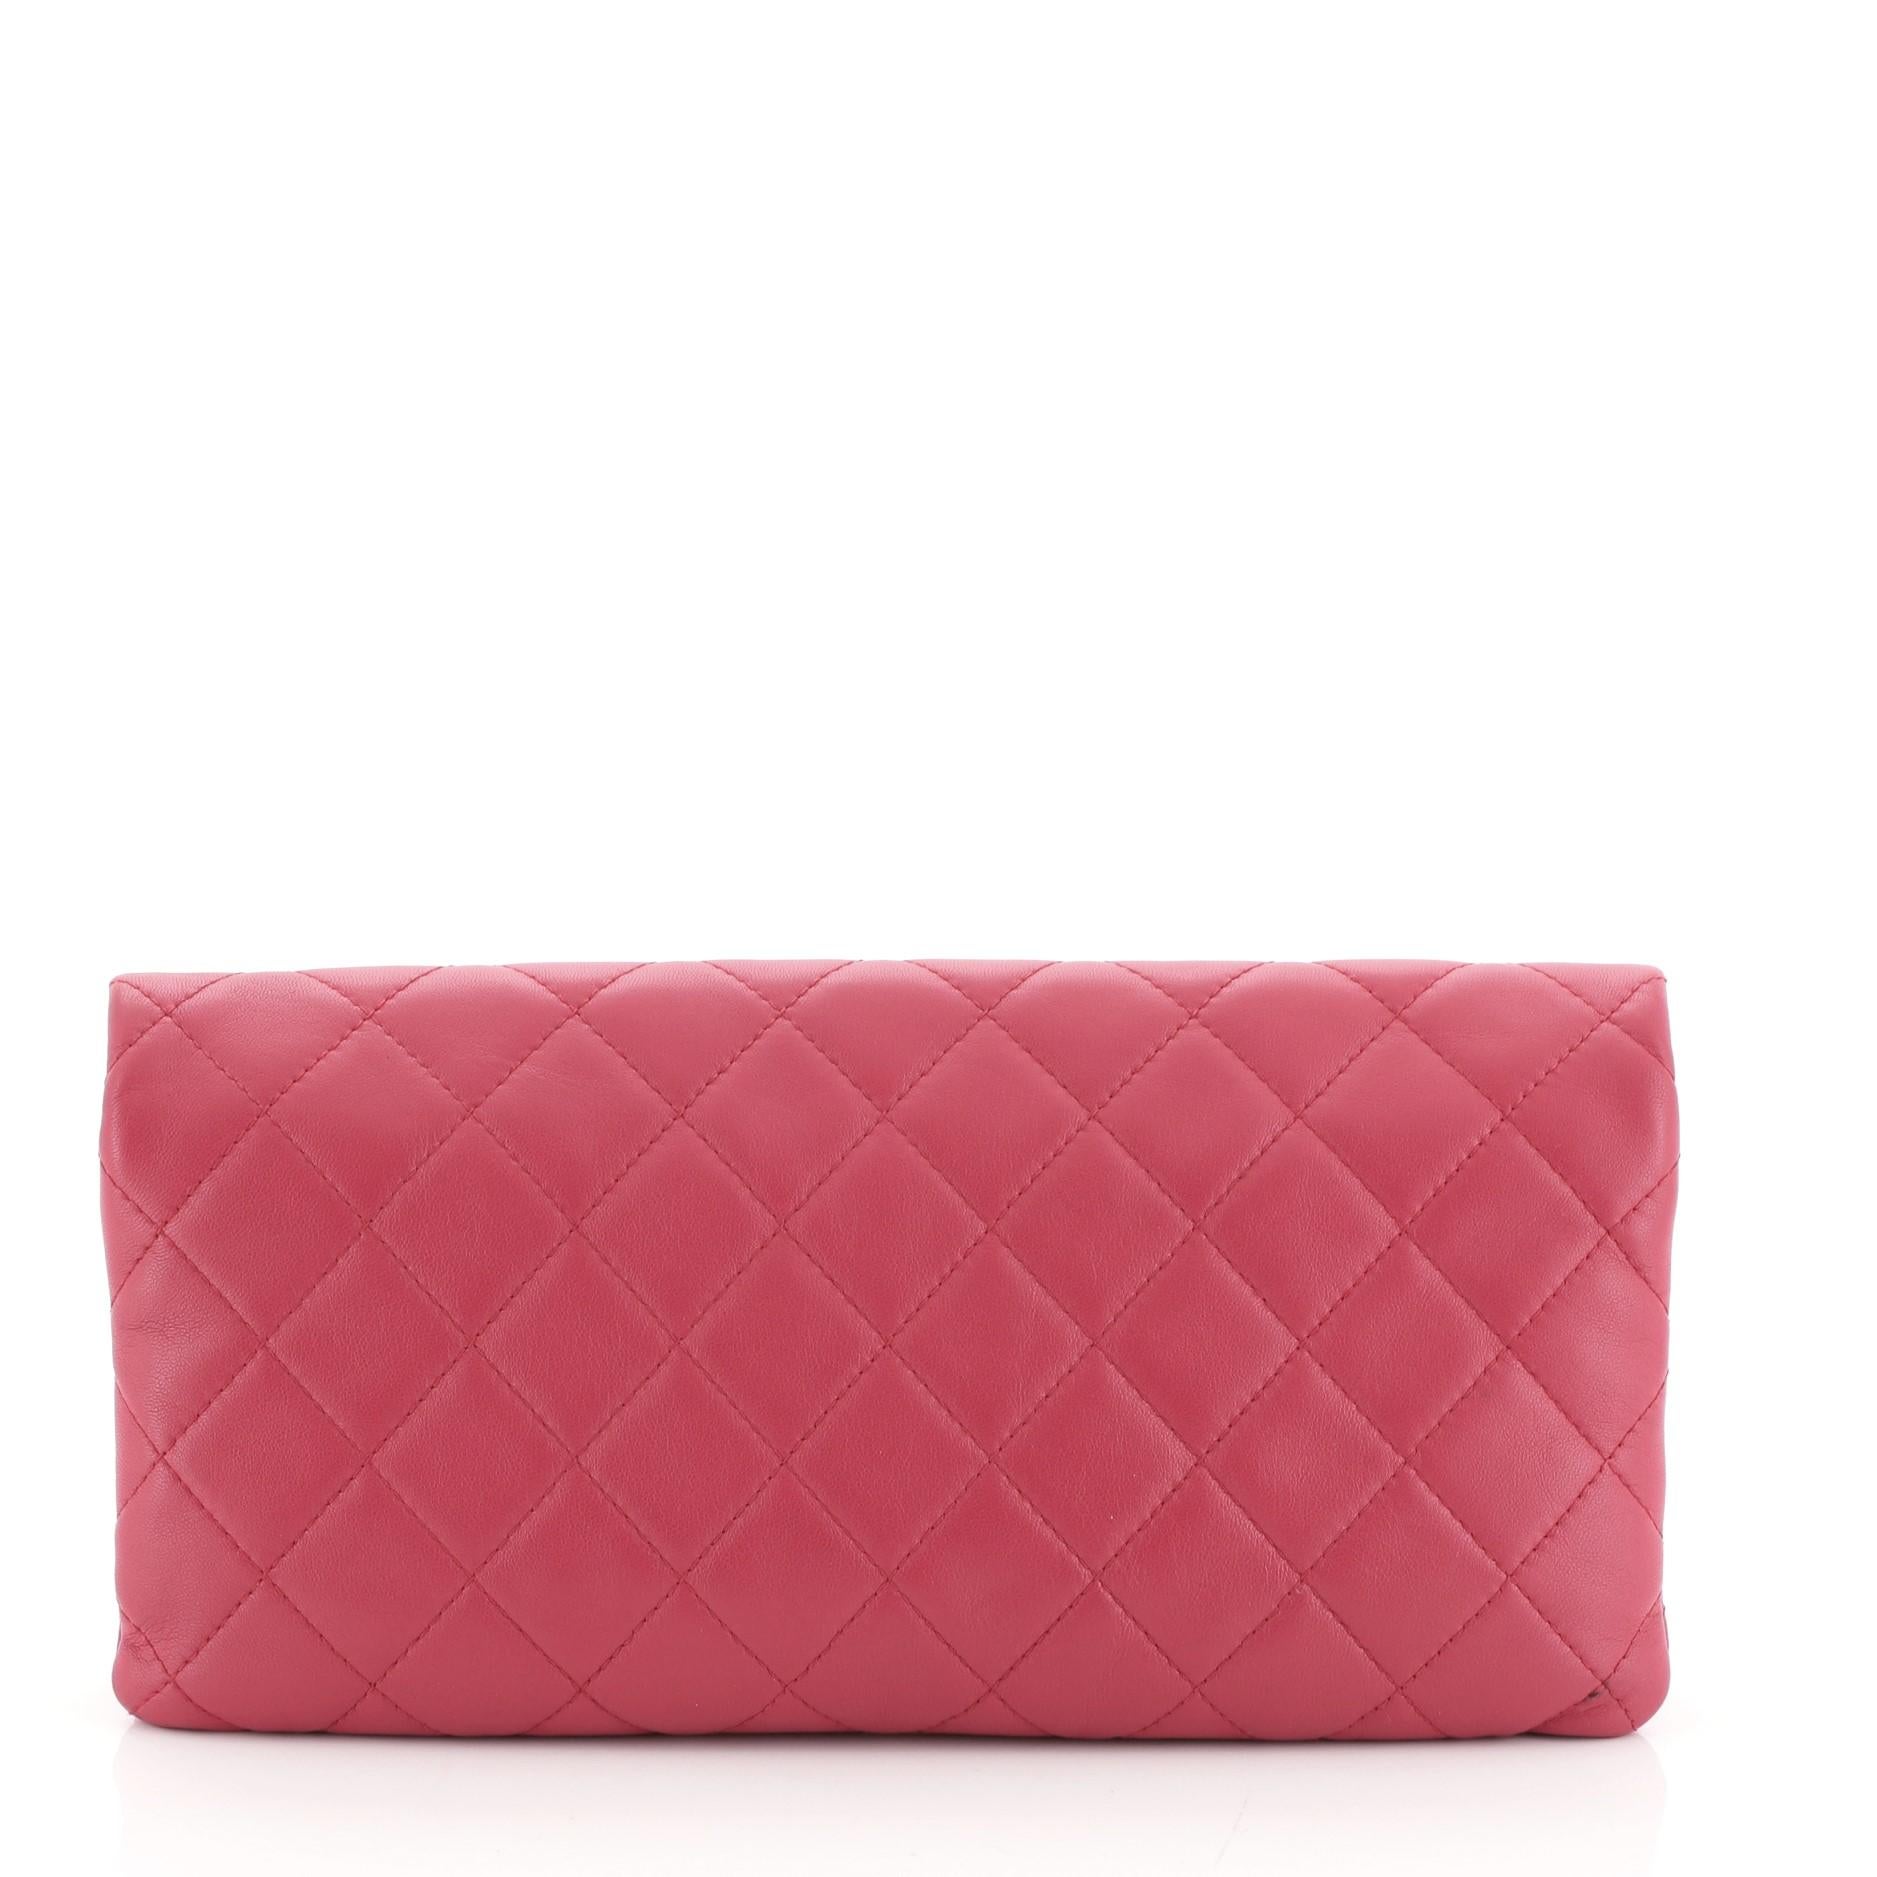 This Chanel Beauty CC Clutch Quilted Lambskin, crafted from red quilted lambskin leather, features CC logo at front and gunmetal-tone hardware. Its fold over flap with zip closure opens to a red satin interior. Hologram sticker reads: 21049723.